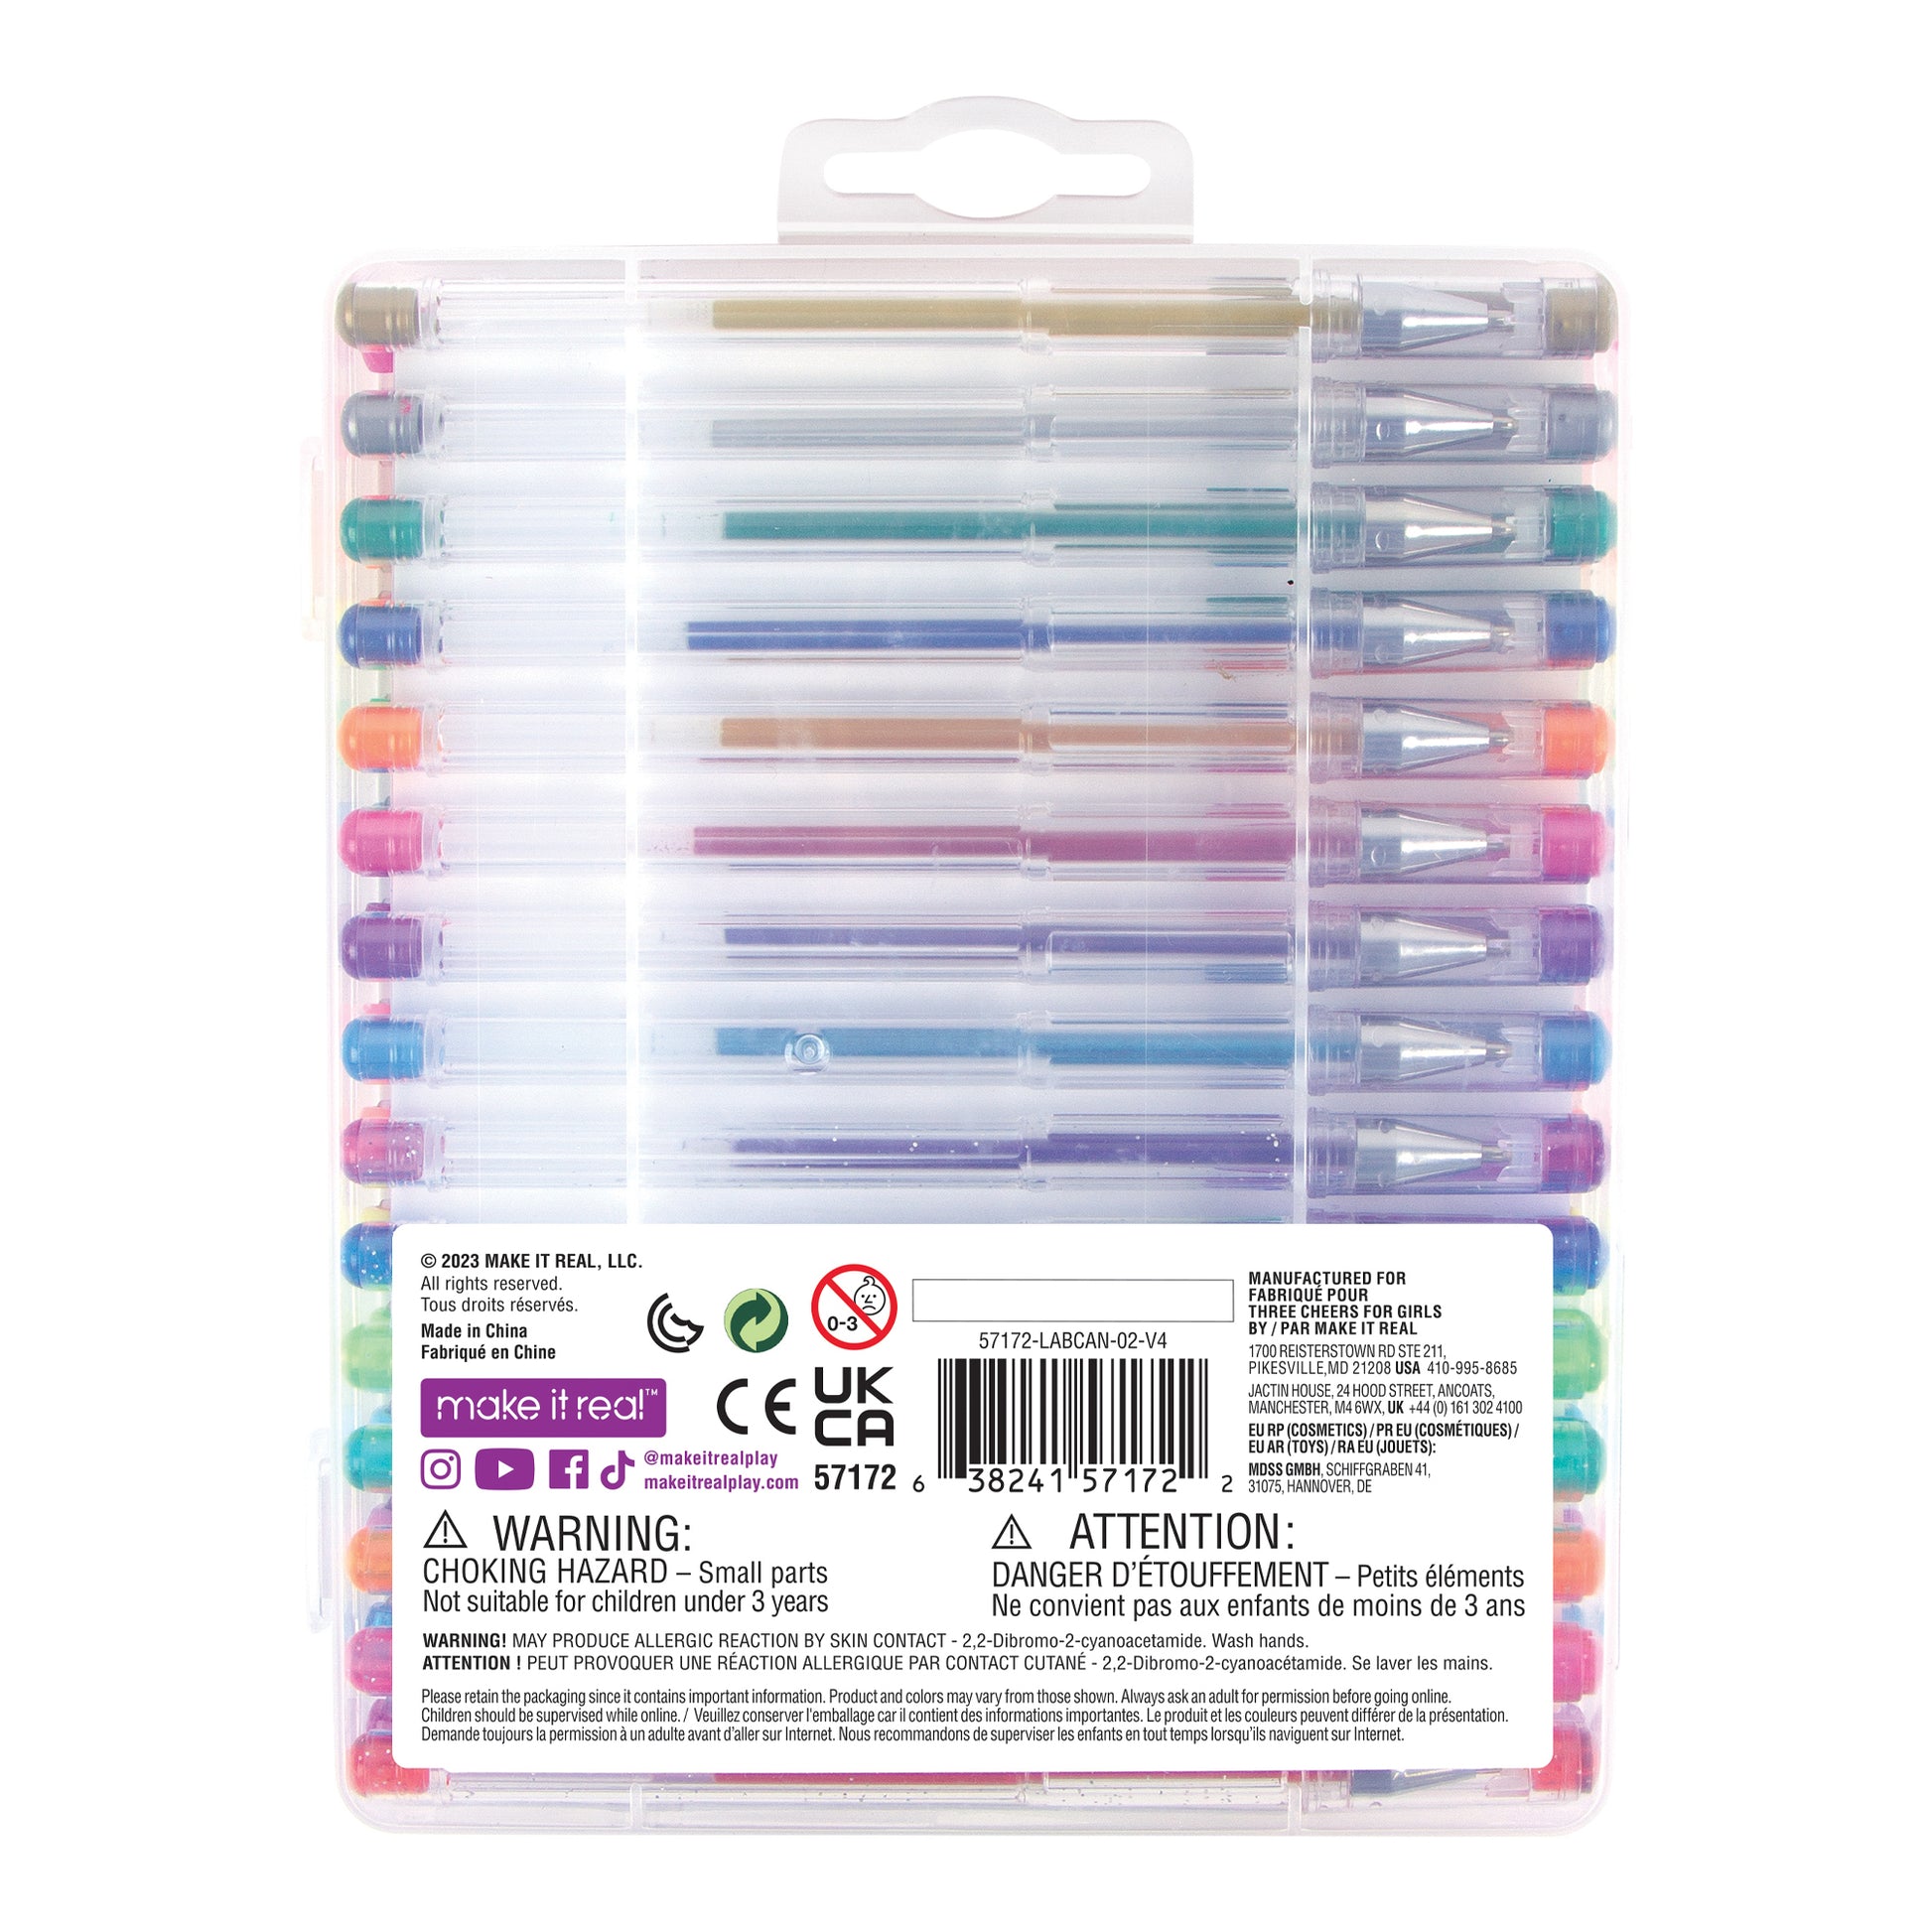 Lowest Price: 24 Count Aen Art Glitter Gel Pens Colored